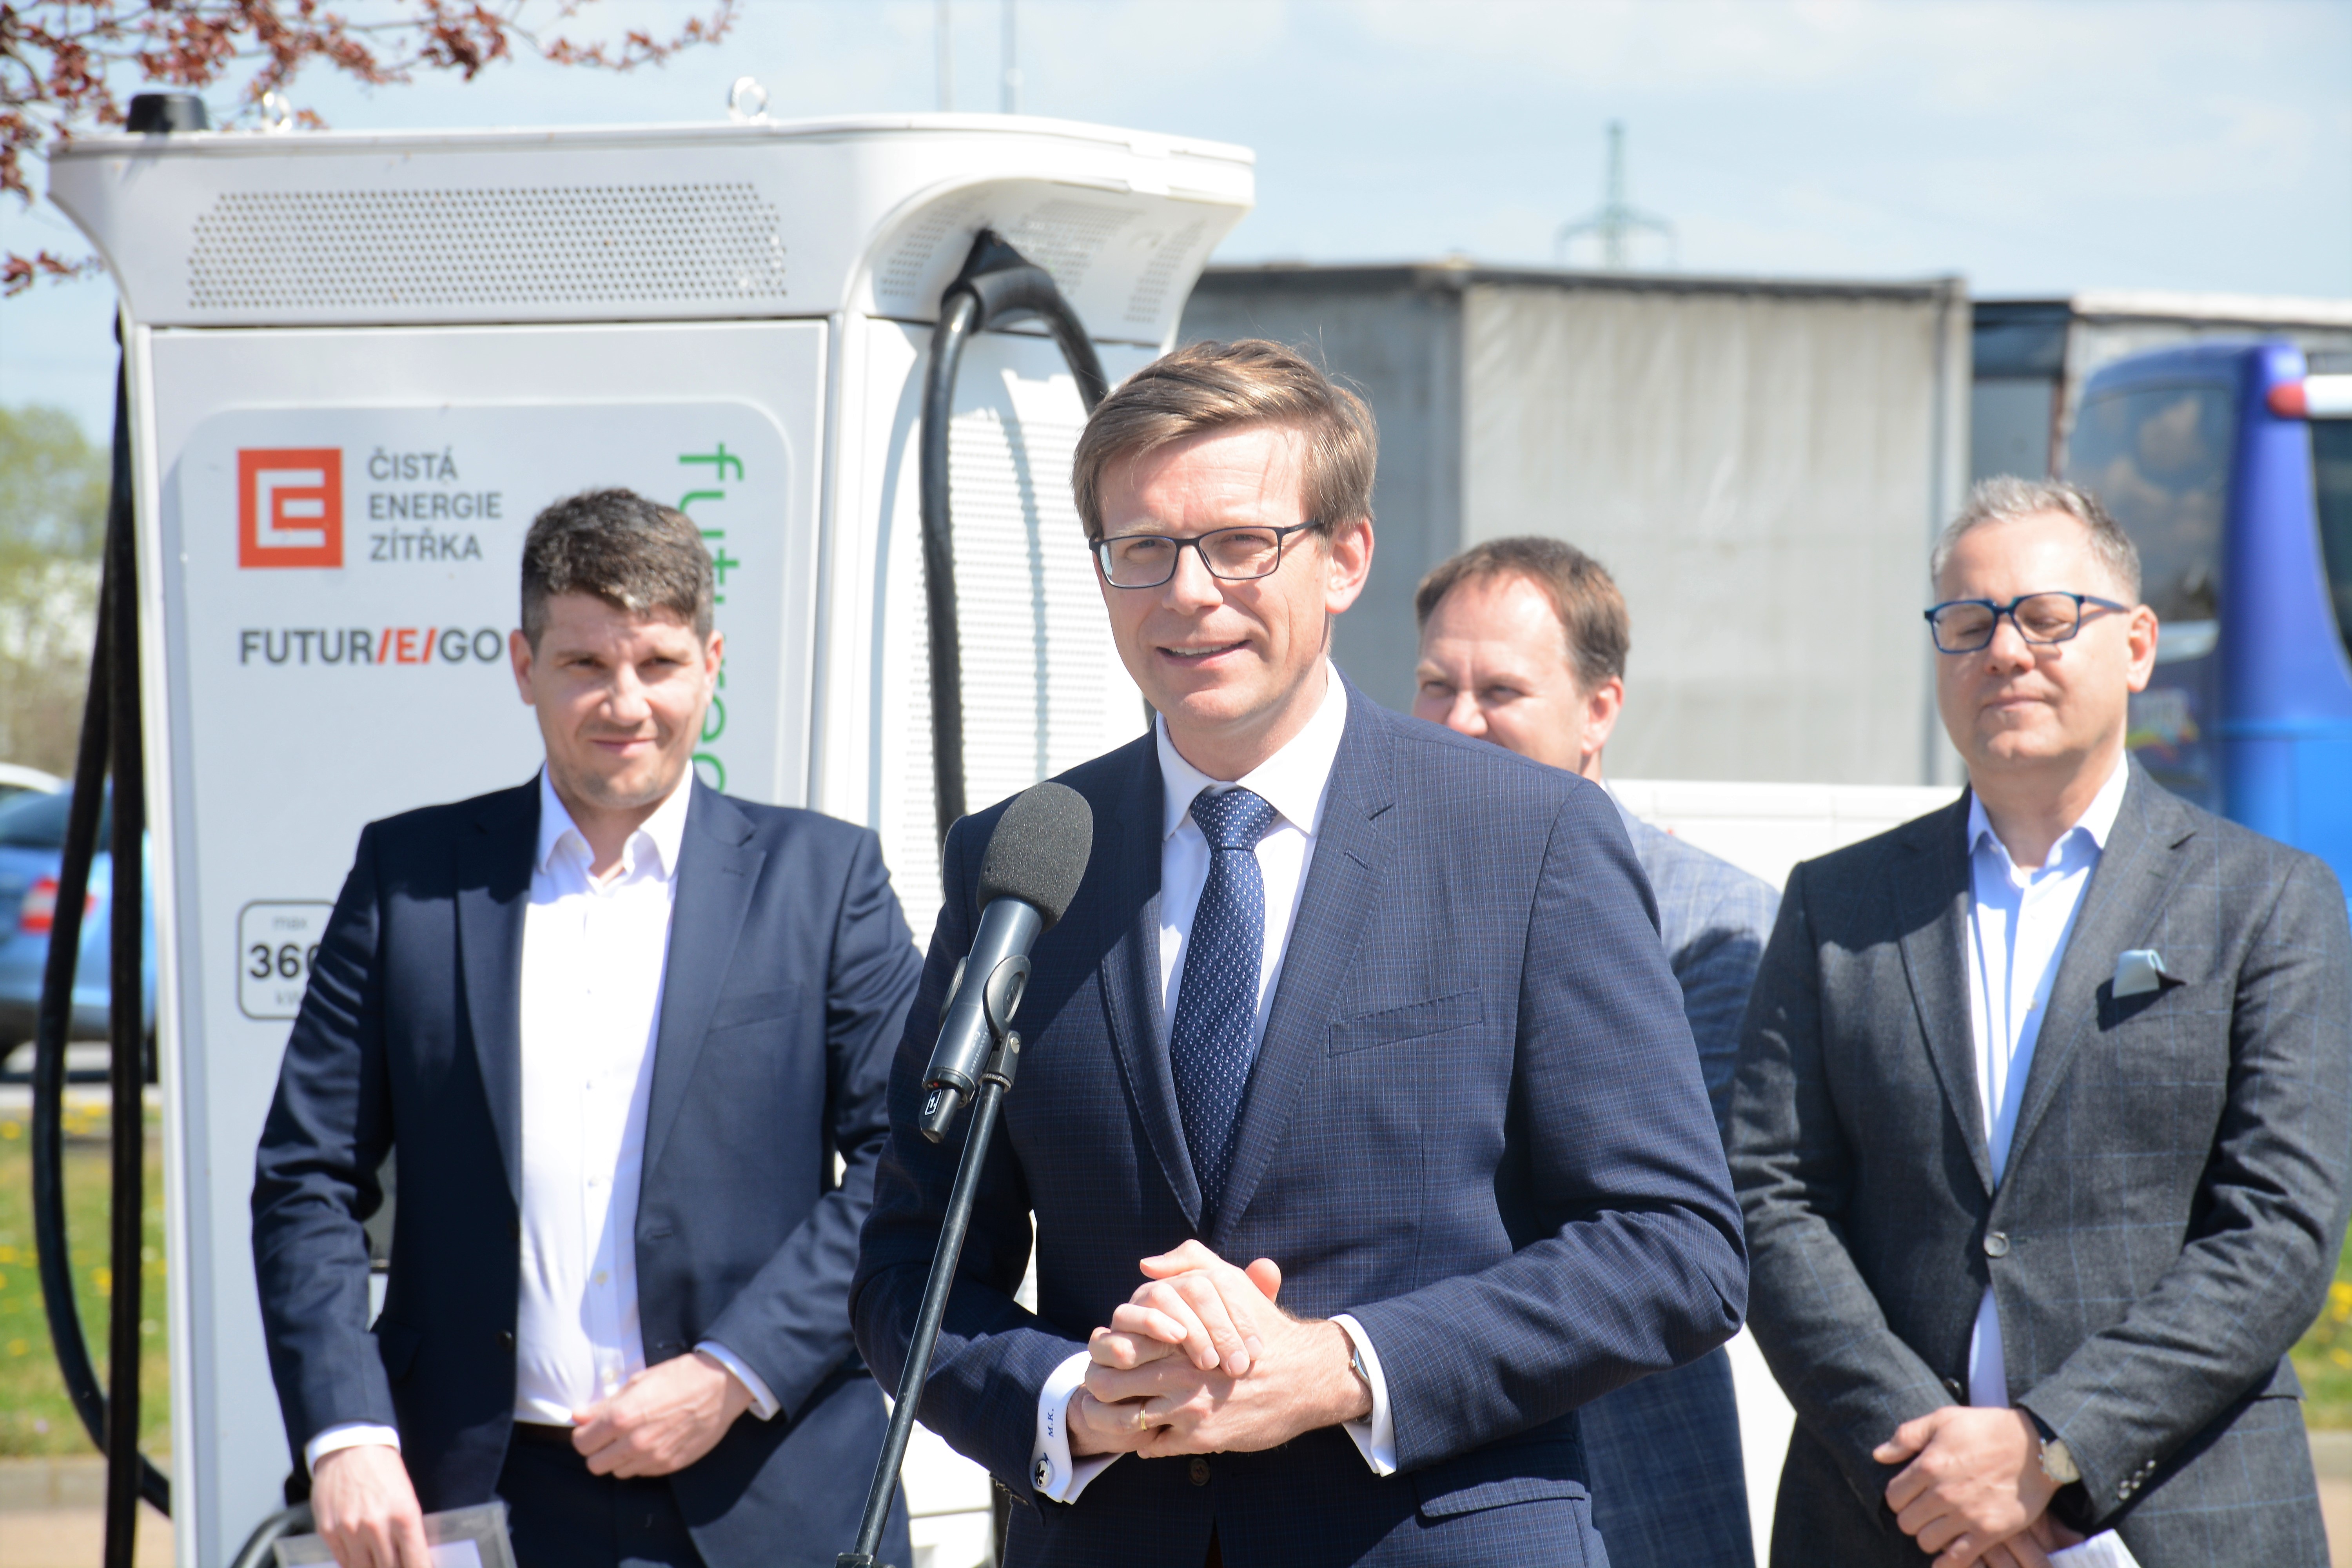 The most powerful charging station for electric vehicles in the whole CZ is now operating in Ml. Bol